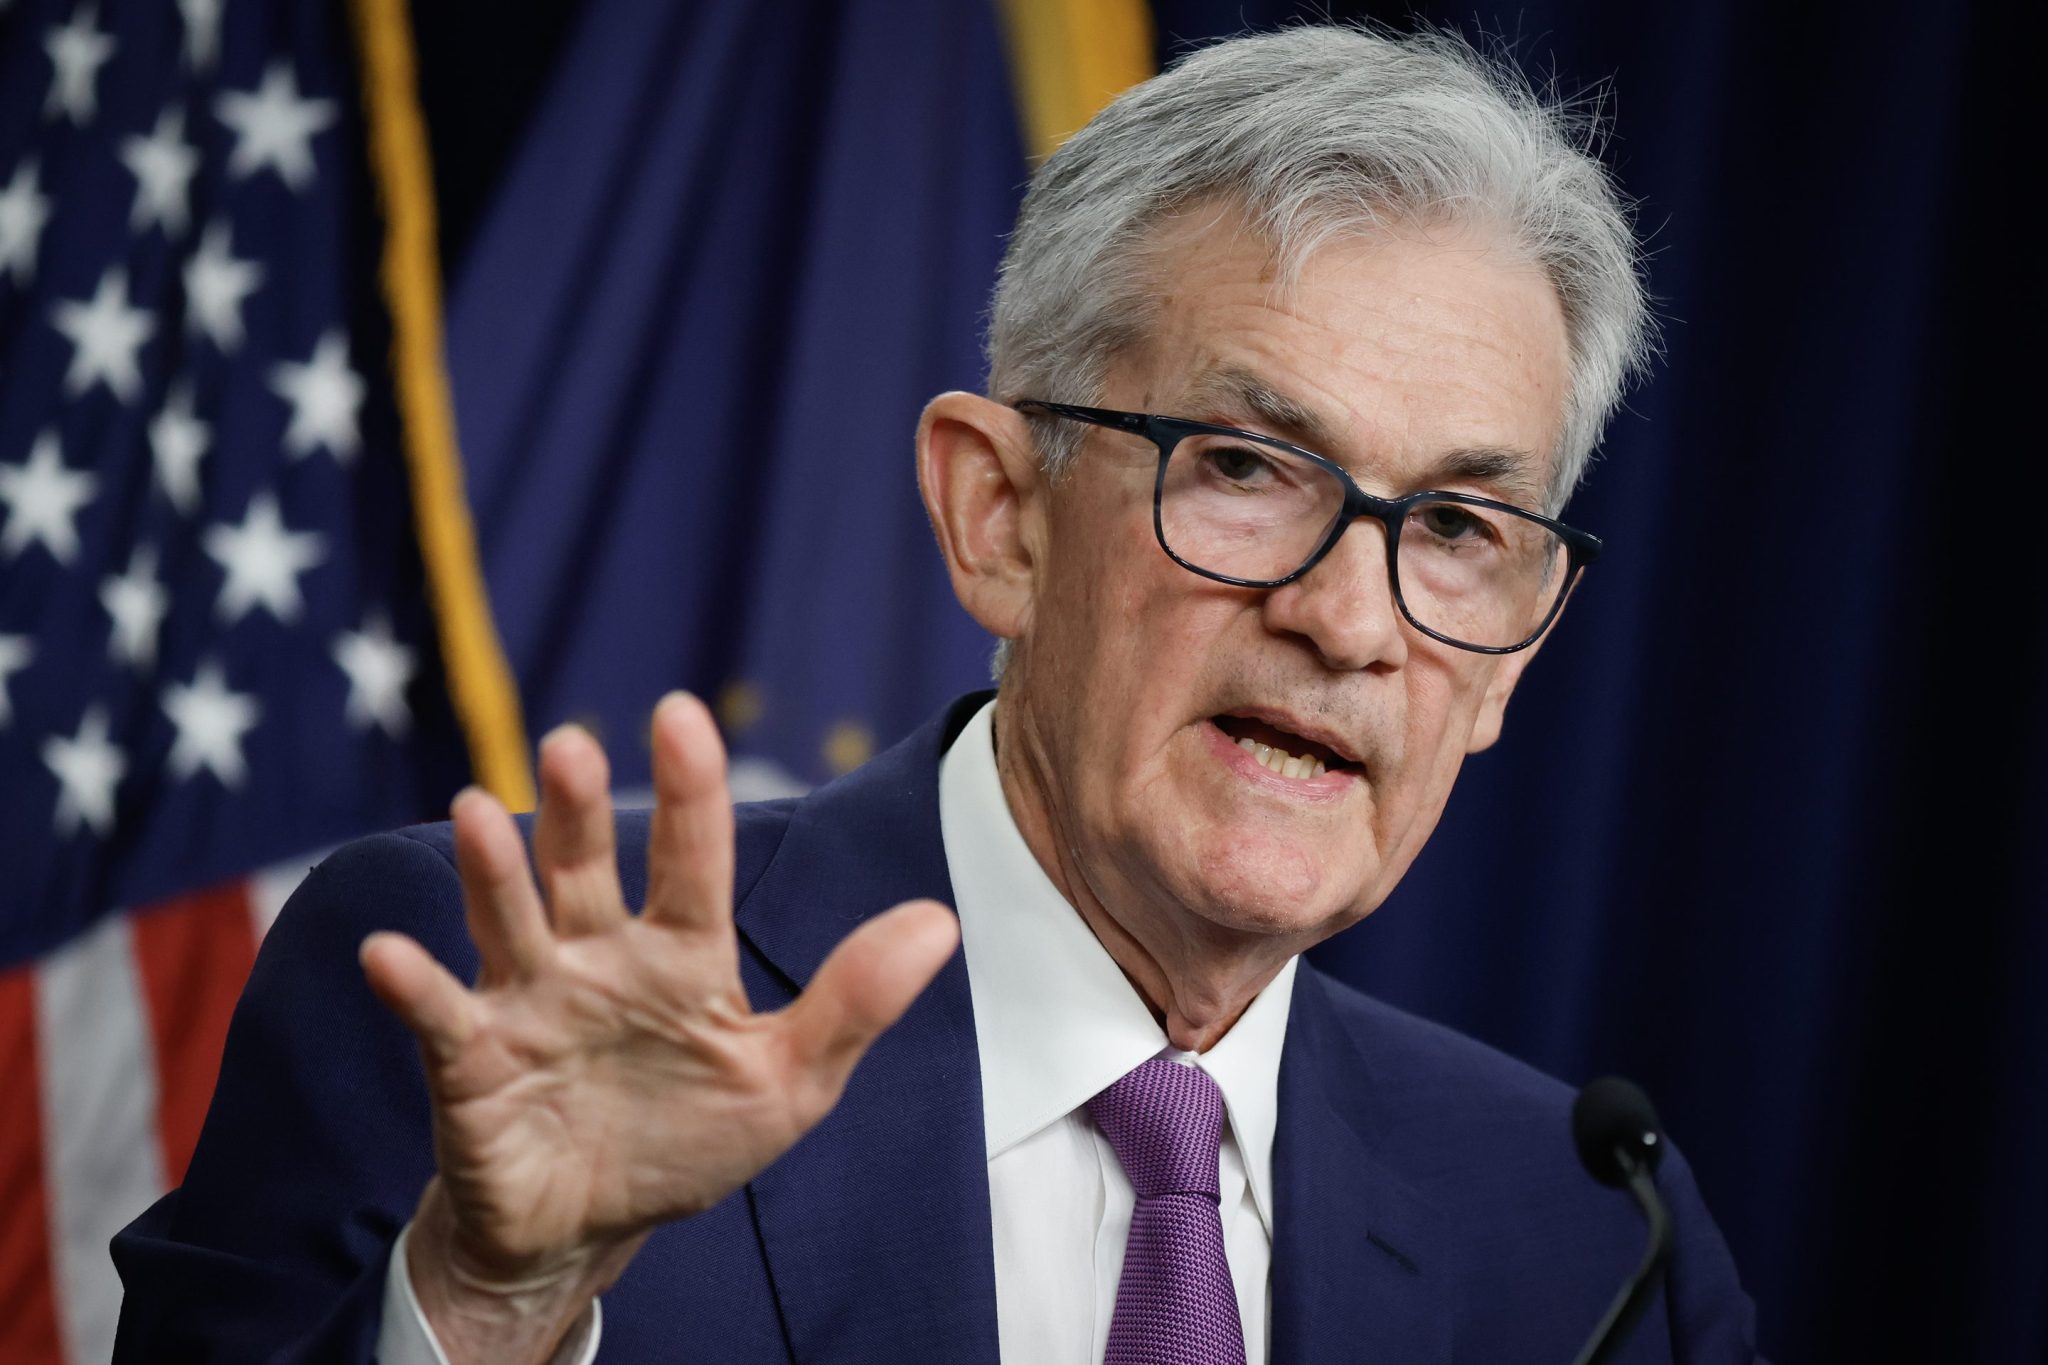 jerome powell has had it with the 1970s talk, saying he doesn’t see the ‘stag’ or the ‘-flation’ investors are worried about